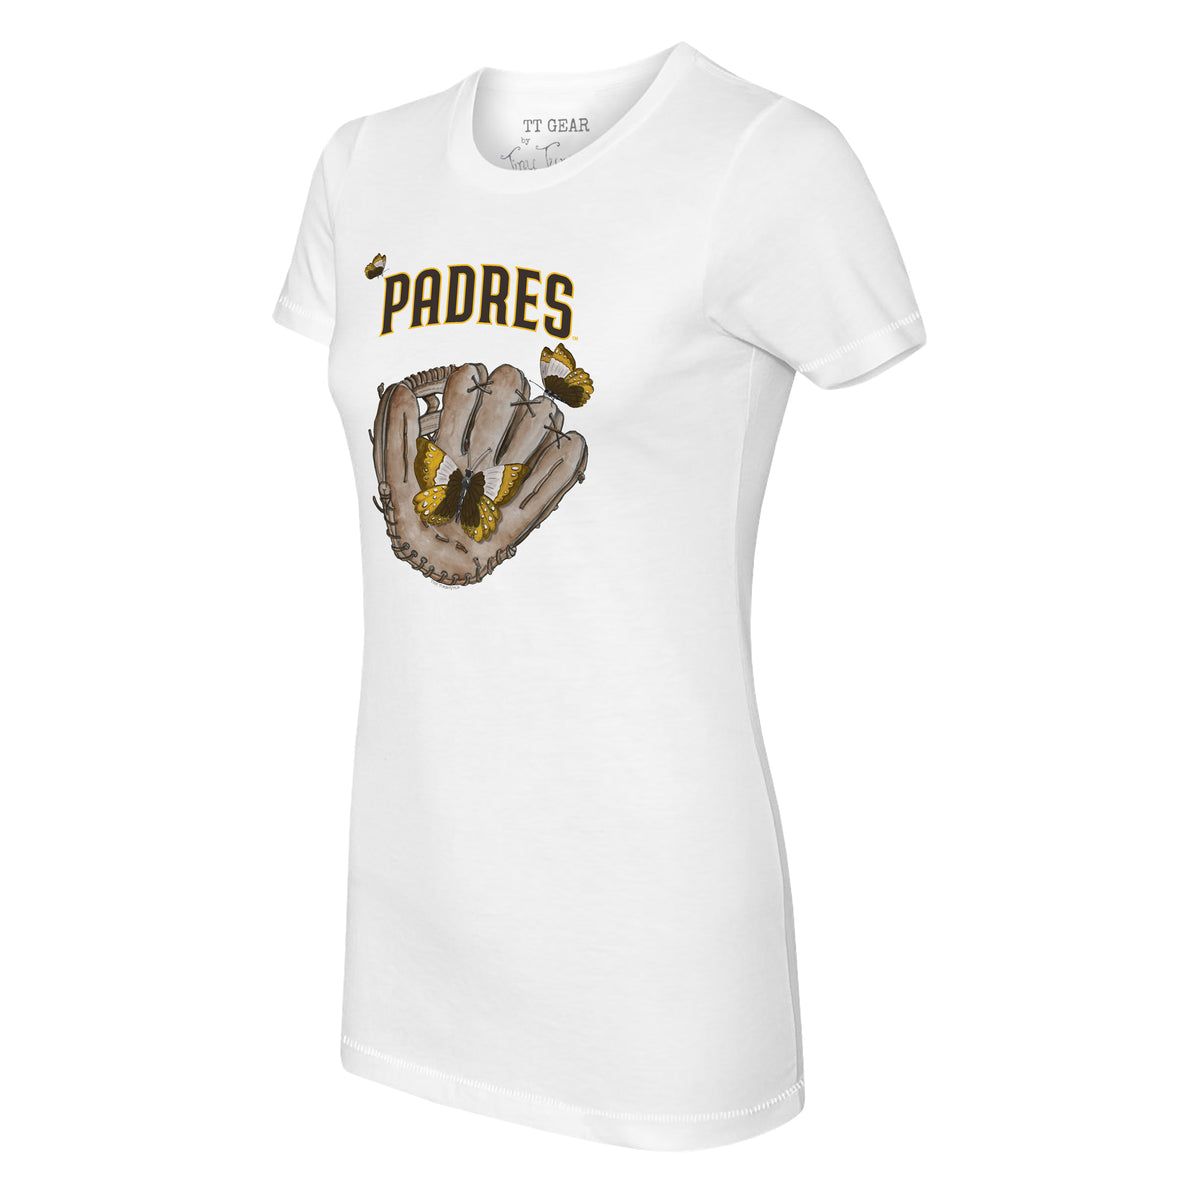 San Diego Padres Butterfly Glove Tee Shirt